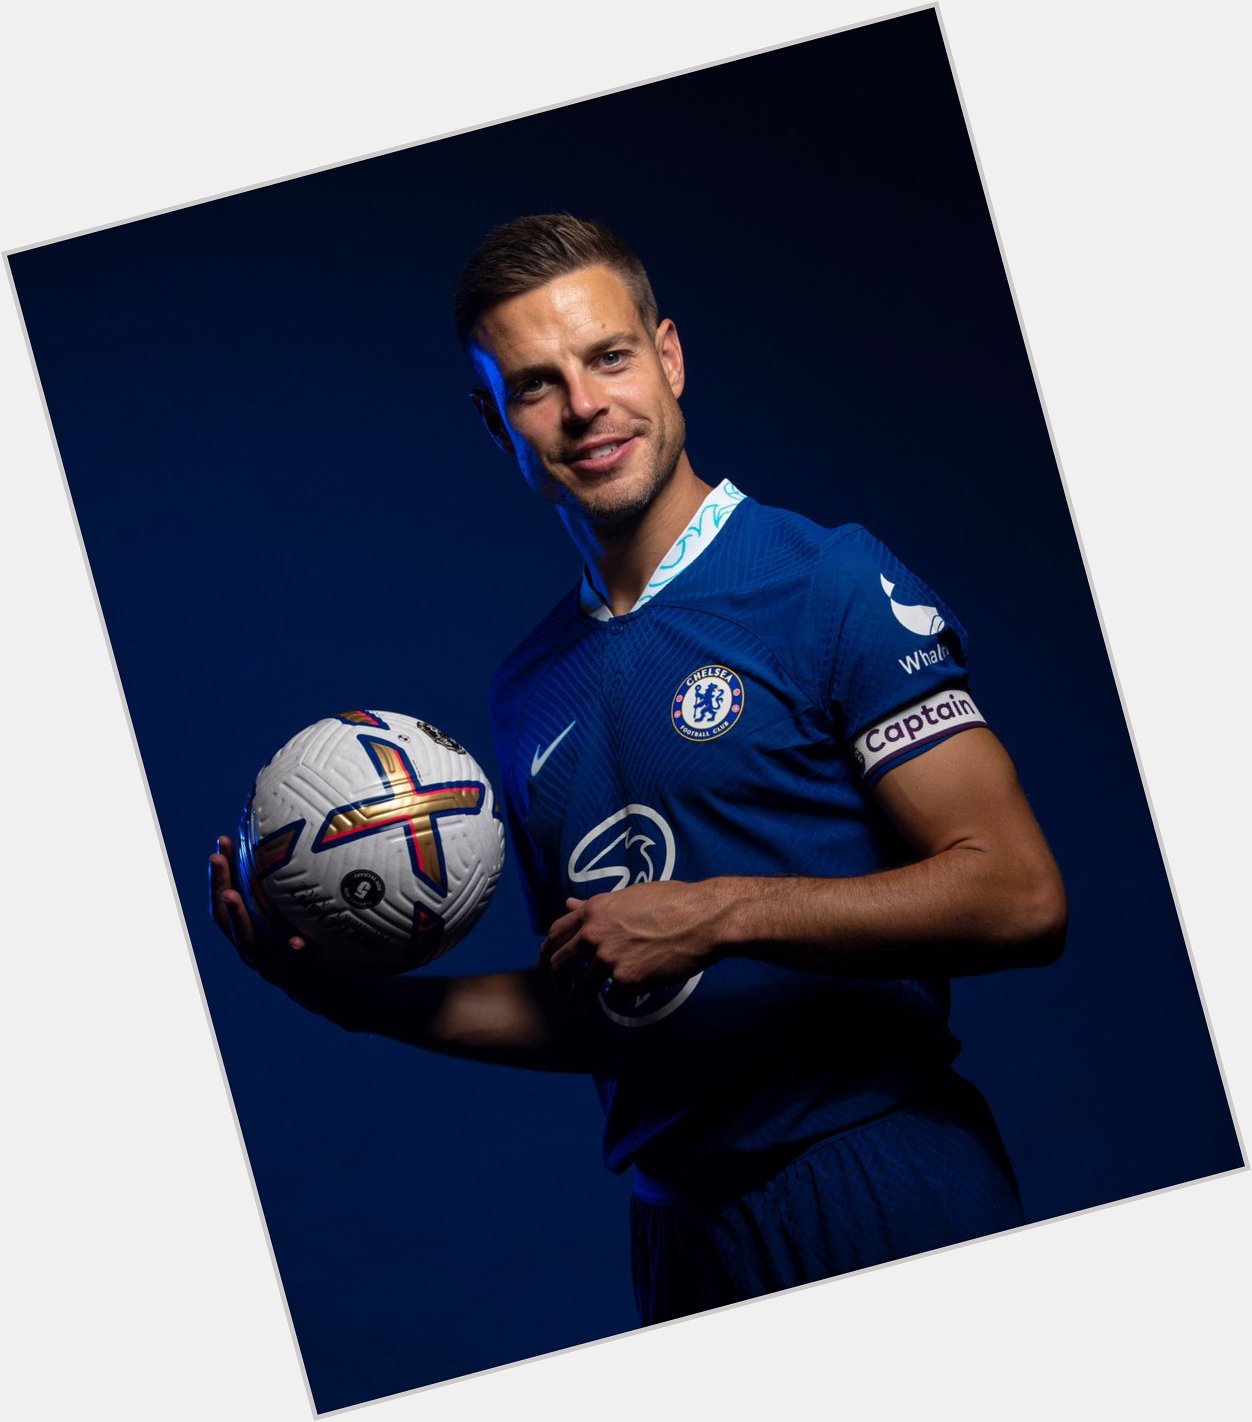 Happy birthday to our Chelsea Legend Azpilicueta, wishing you many more successful years ahead. 